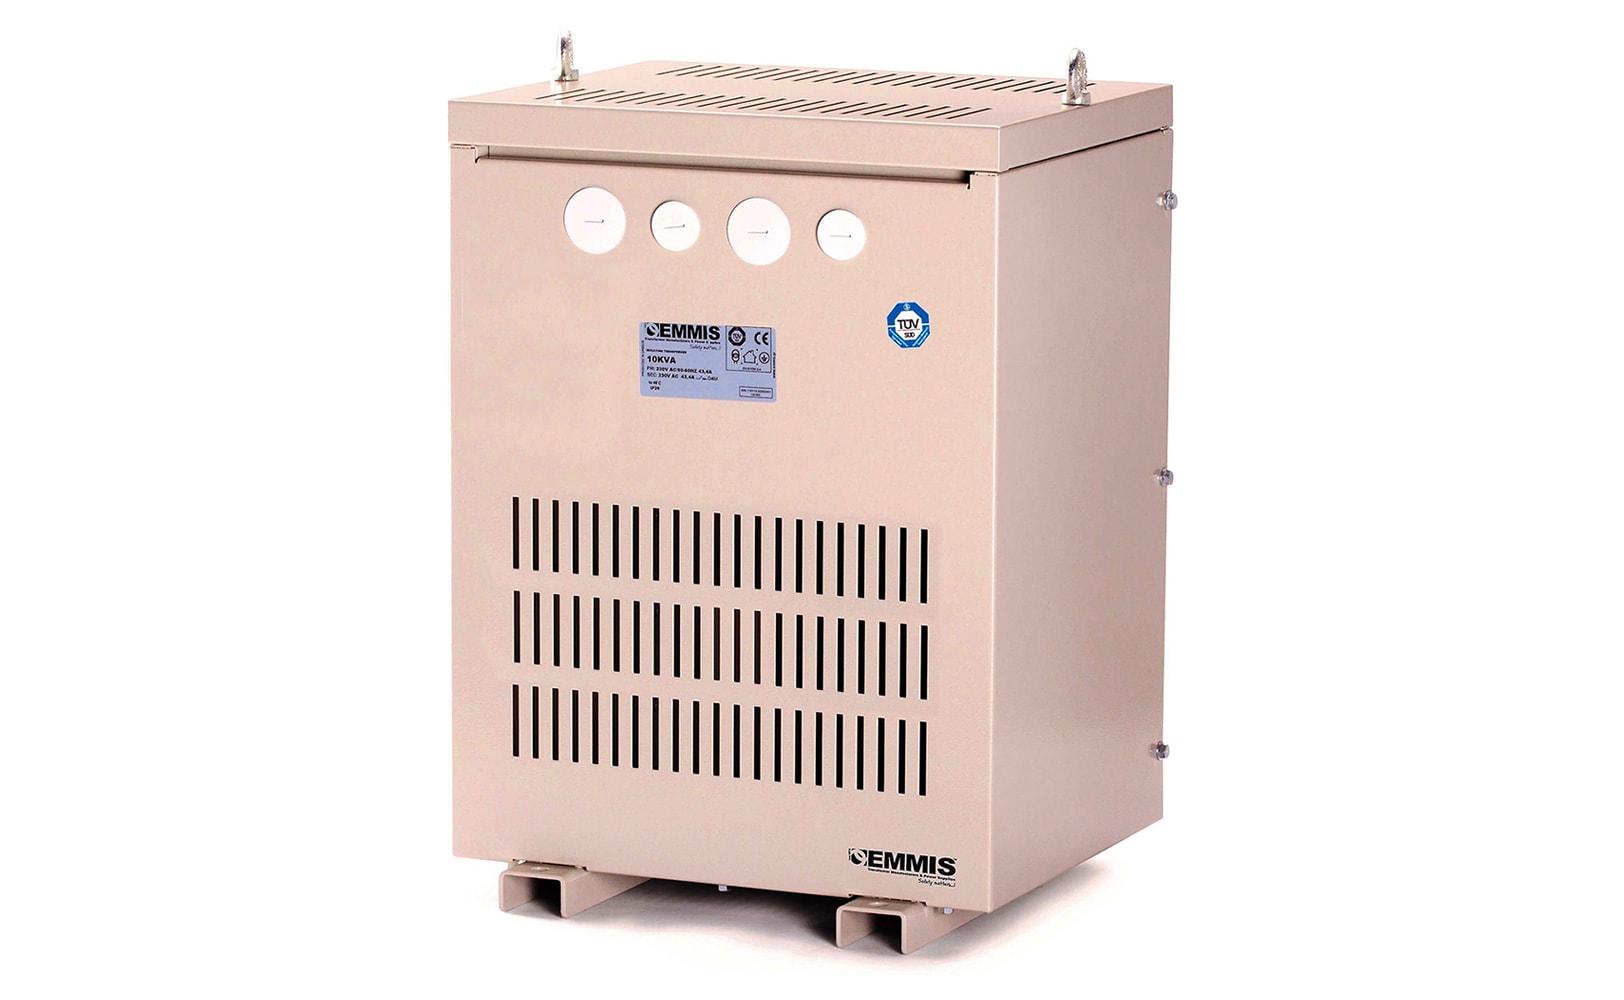 EMMIS isolation transformers in UPS applications